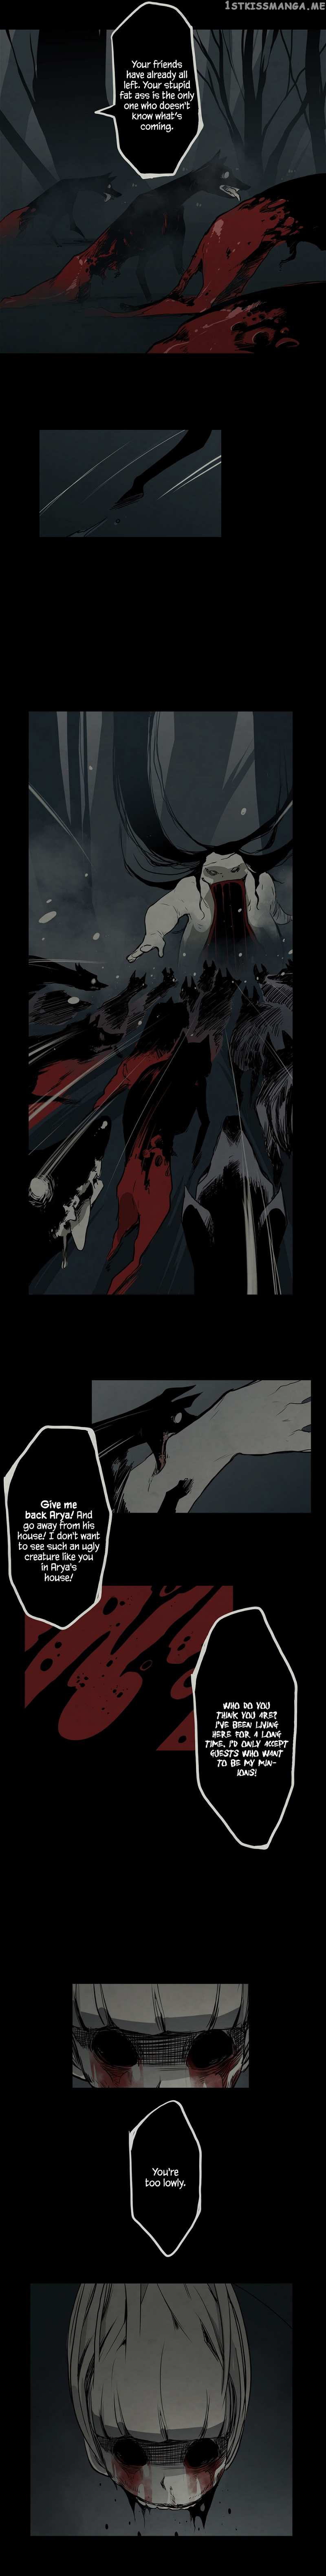 Creep In chapter 21 - page 11